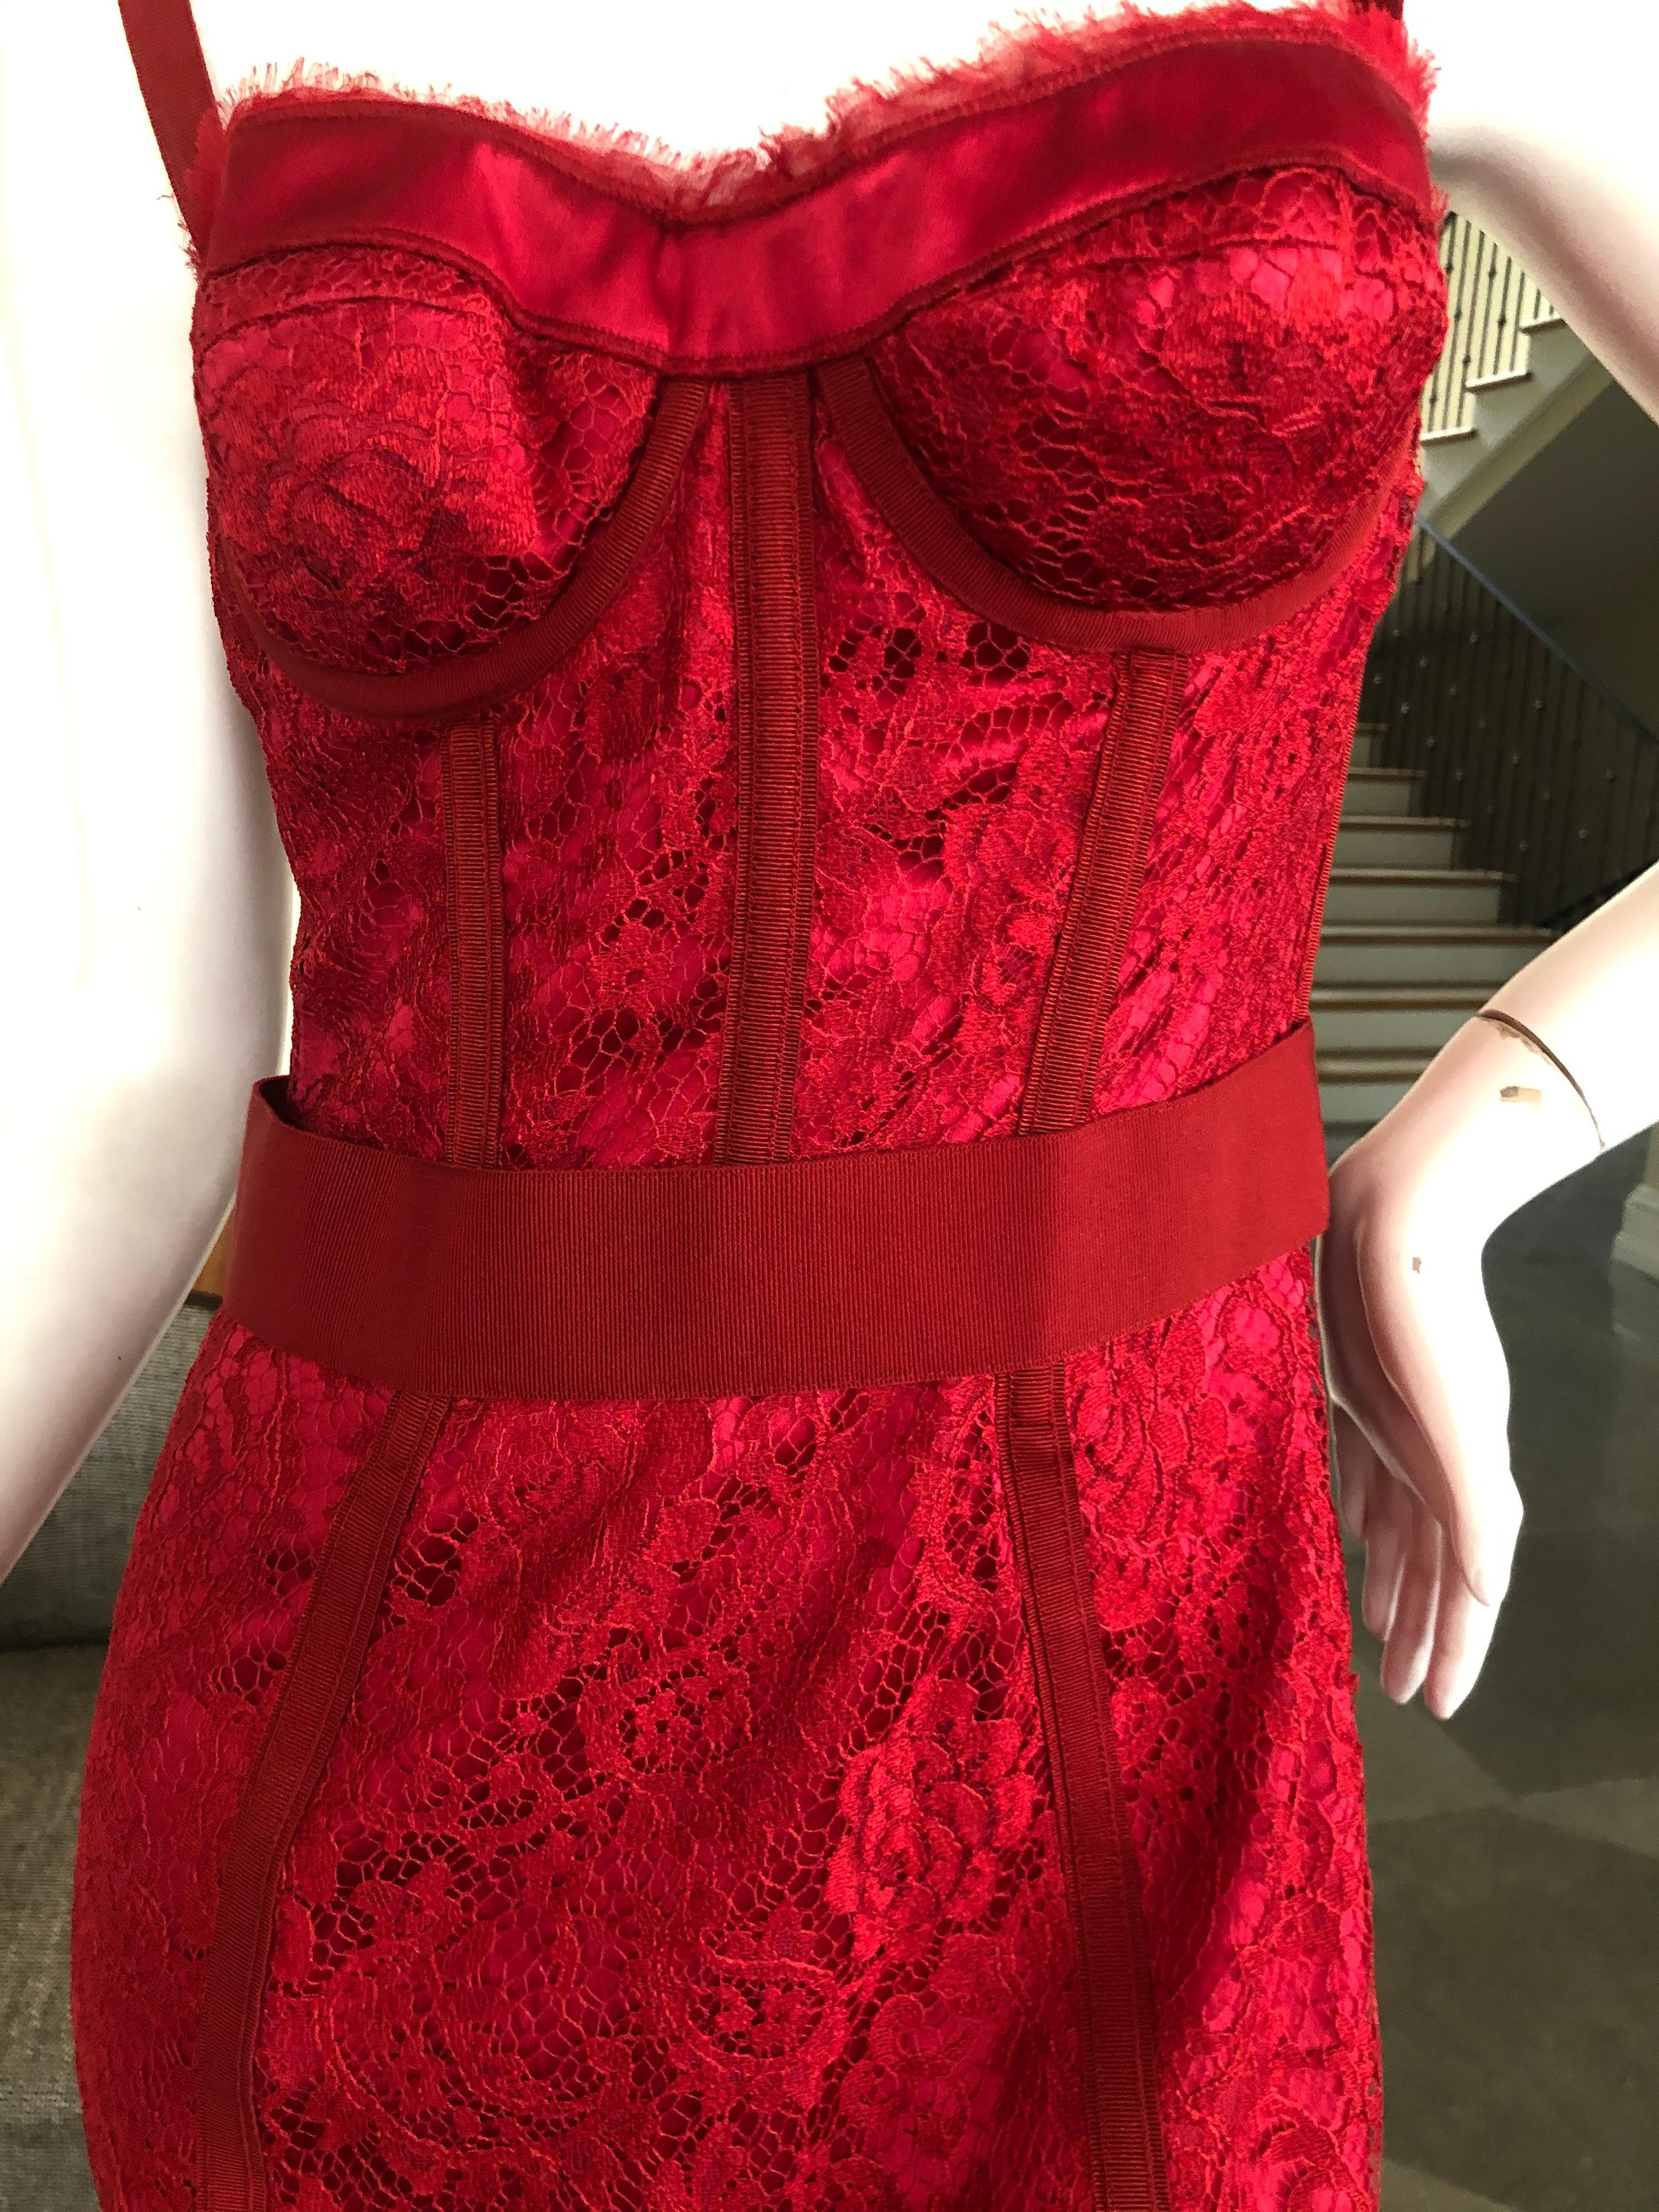 Dolce & Gabbana Vintage Red Lace Corset Cocktail Dress  In Excellent Condition For Sale In Cloverdale, CA